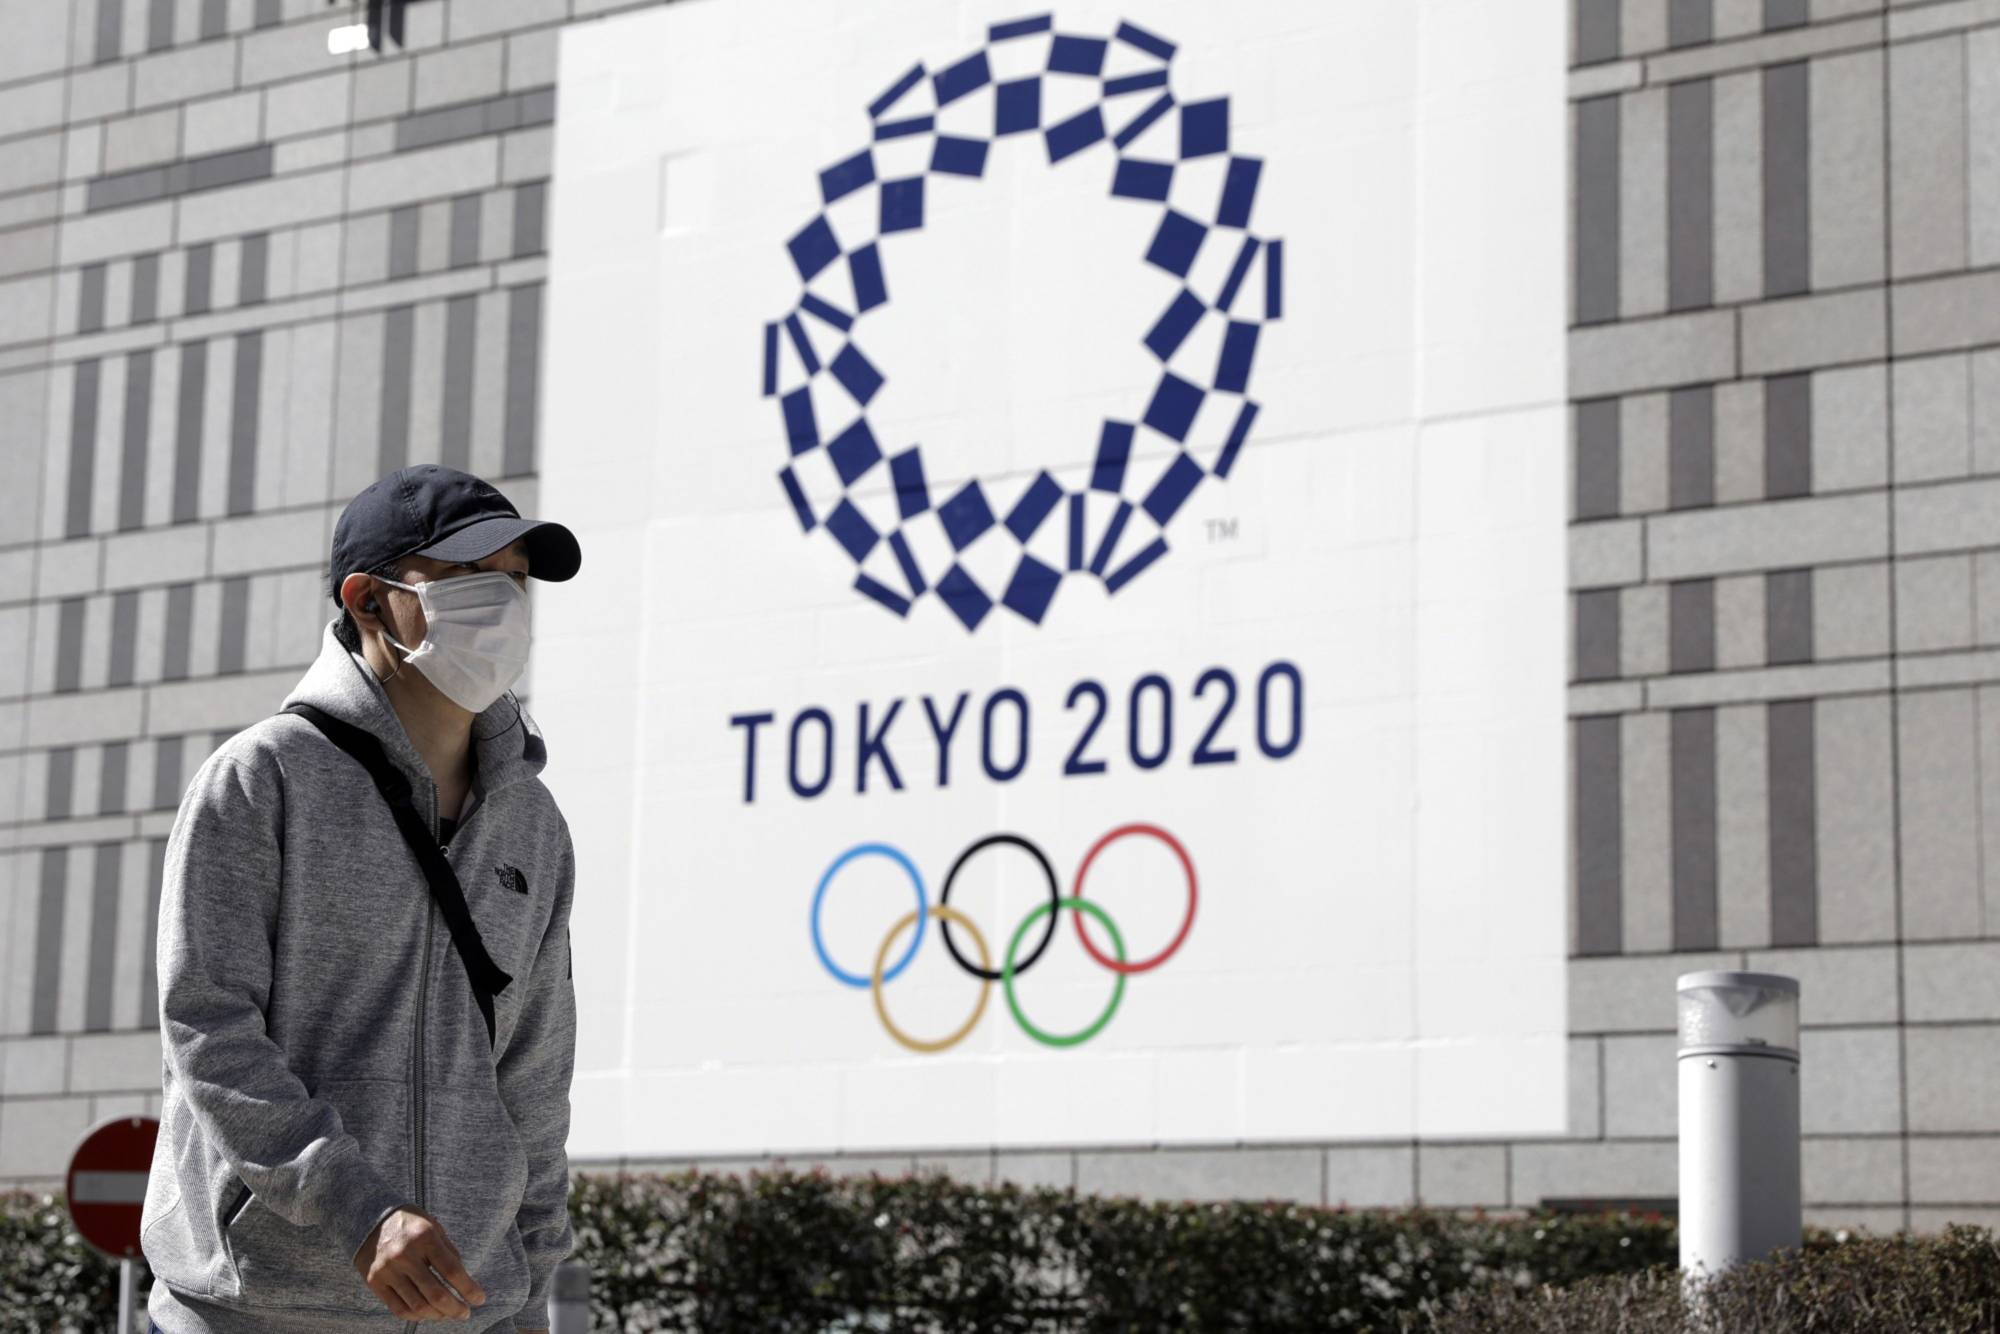 The possibility of the Tokyo Olympics’ cancellation and the economic fallout created by the pandemic, coupled with the public’s disapproval of Prime Minister Shinzo Abe’s coronavirus response, could deal a blow to the prime minister’s legacy. | BLOOMBERG